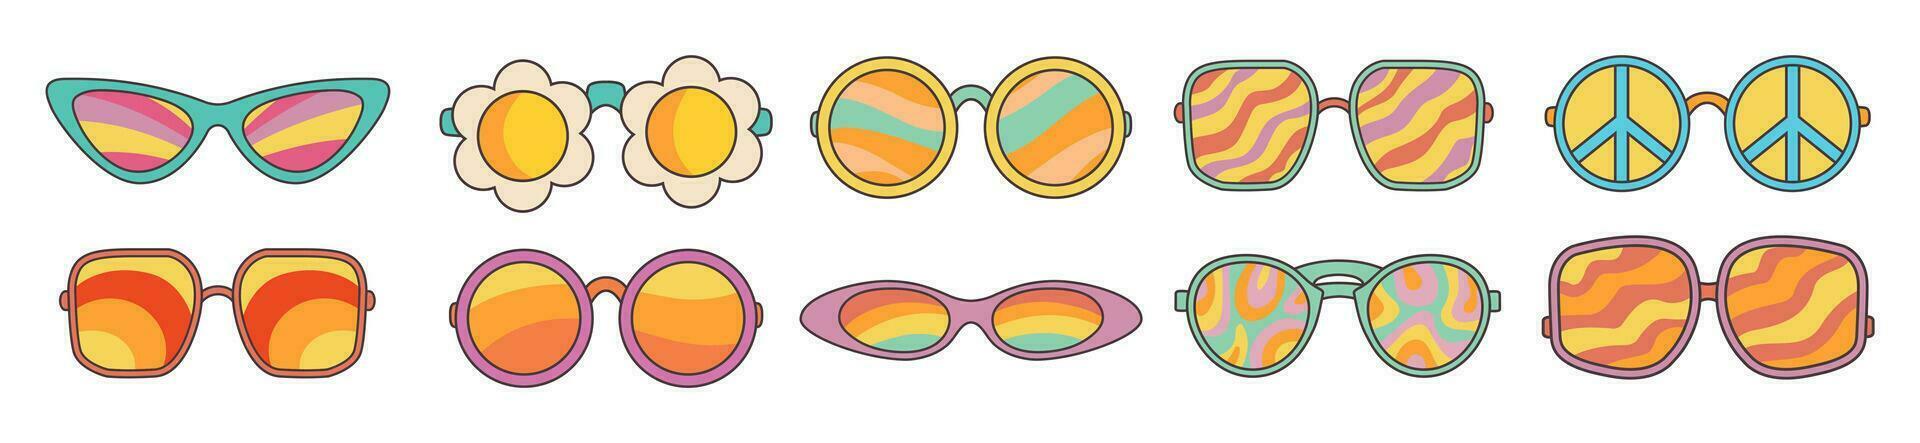 Groovy sunglasses set in retro hippie style. Cartoon psychedelic elements. vector